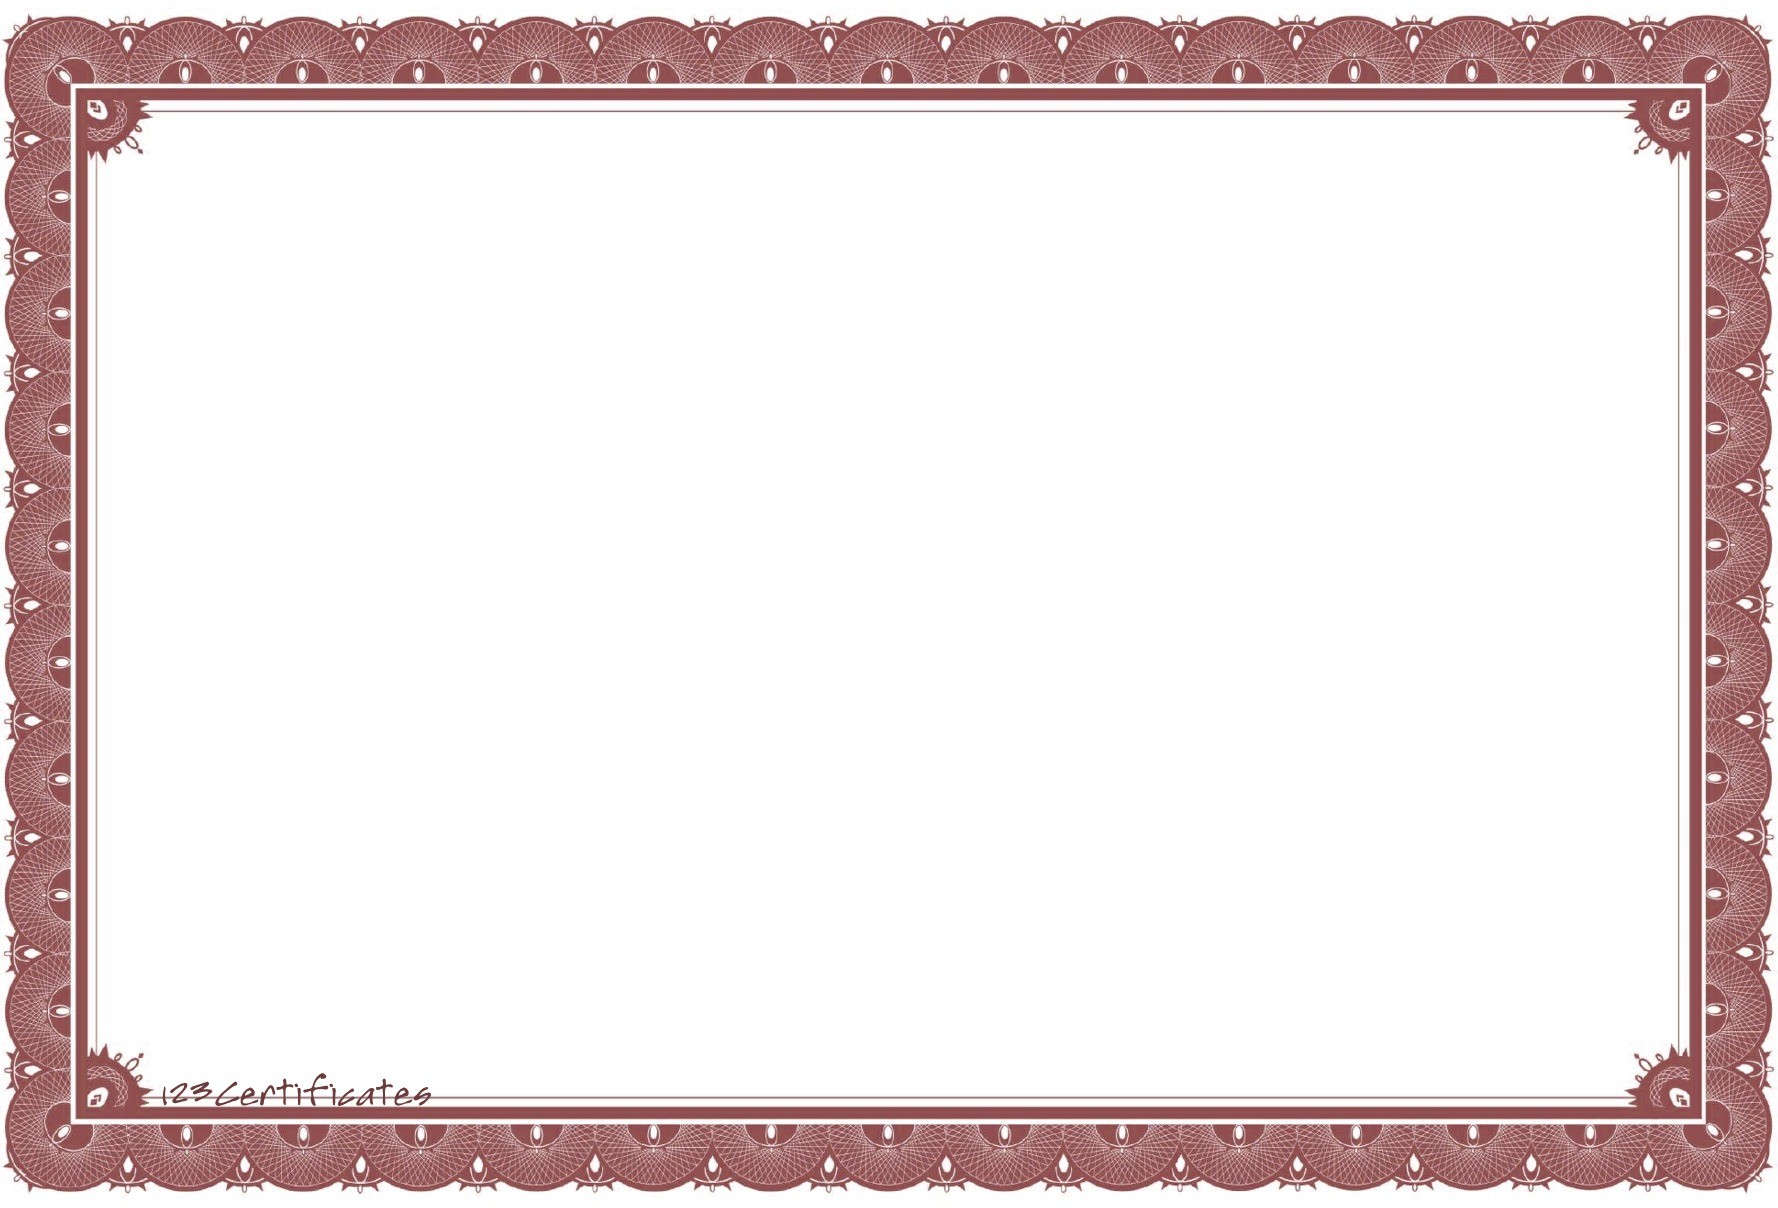 Free Downloadable Borders And Frames